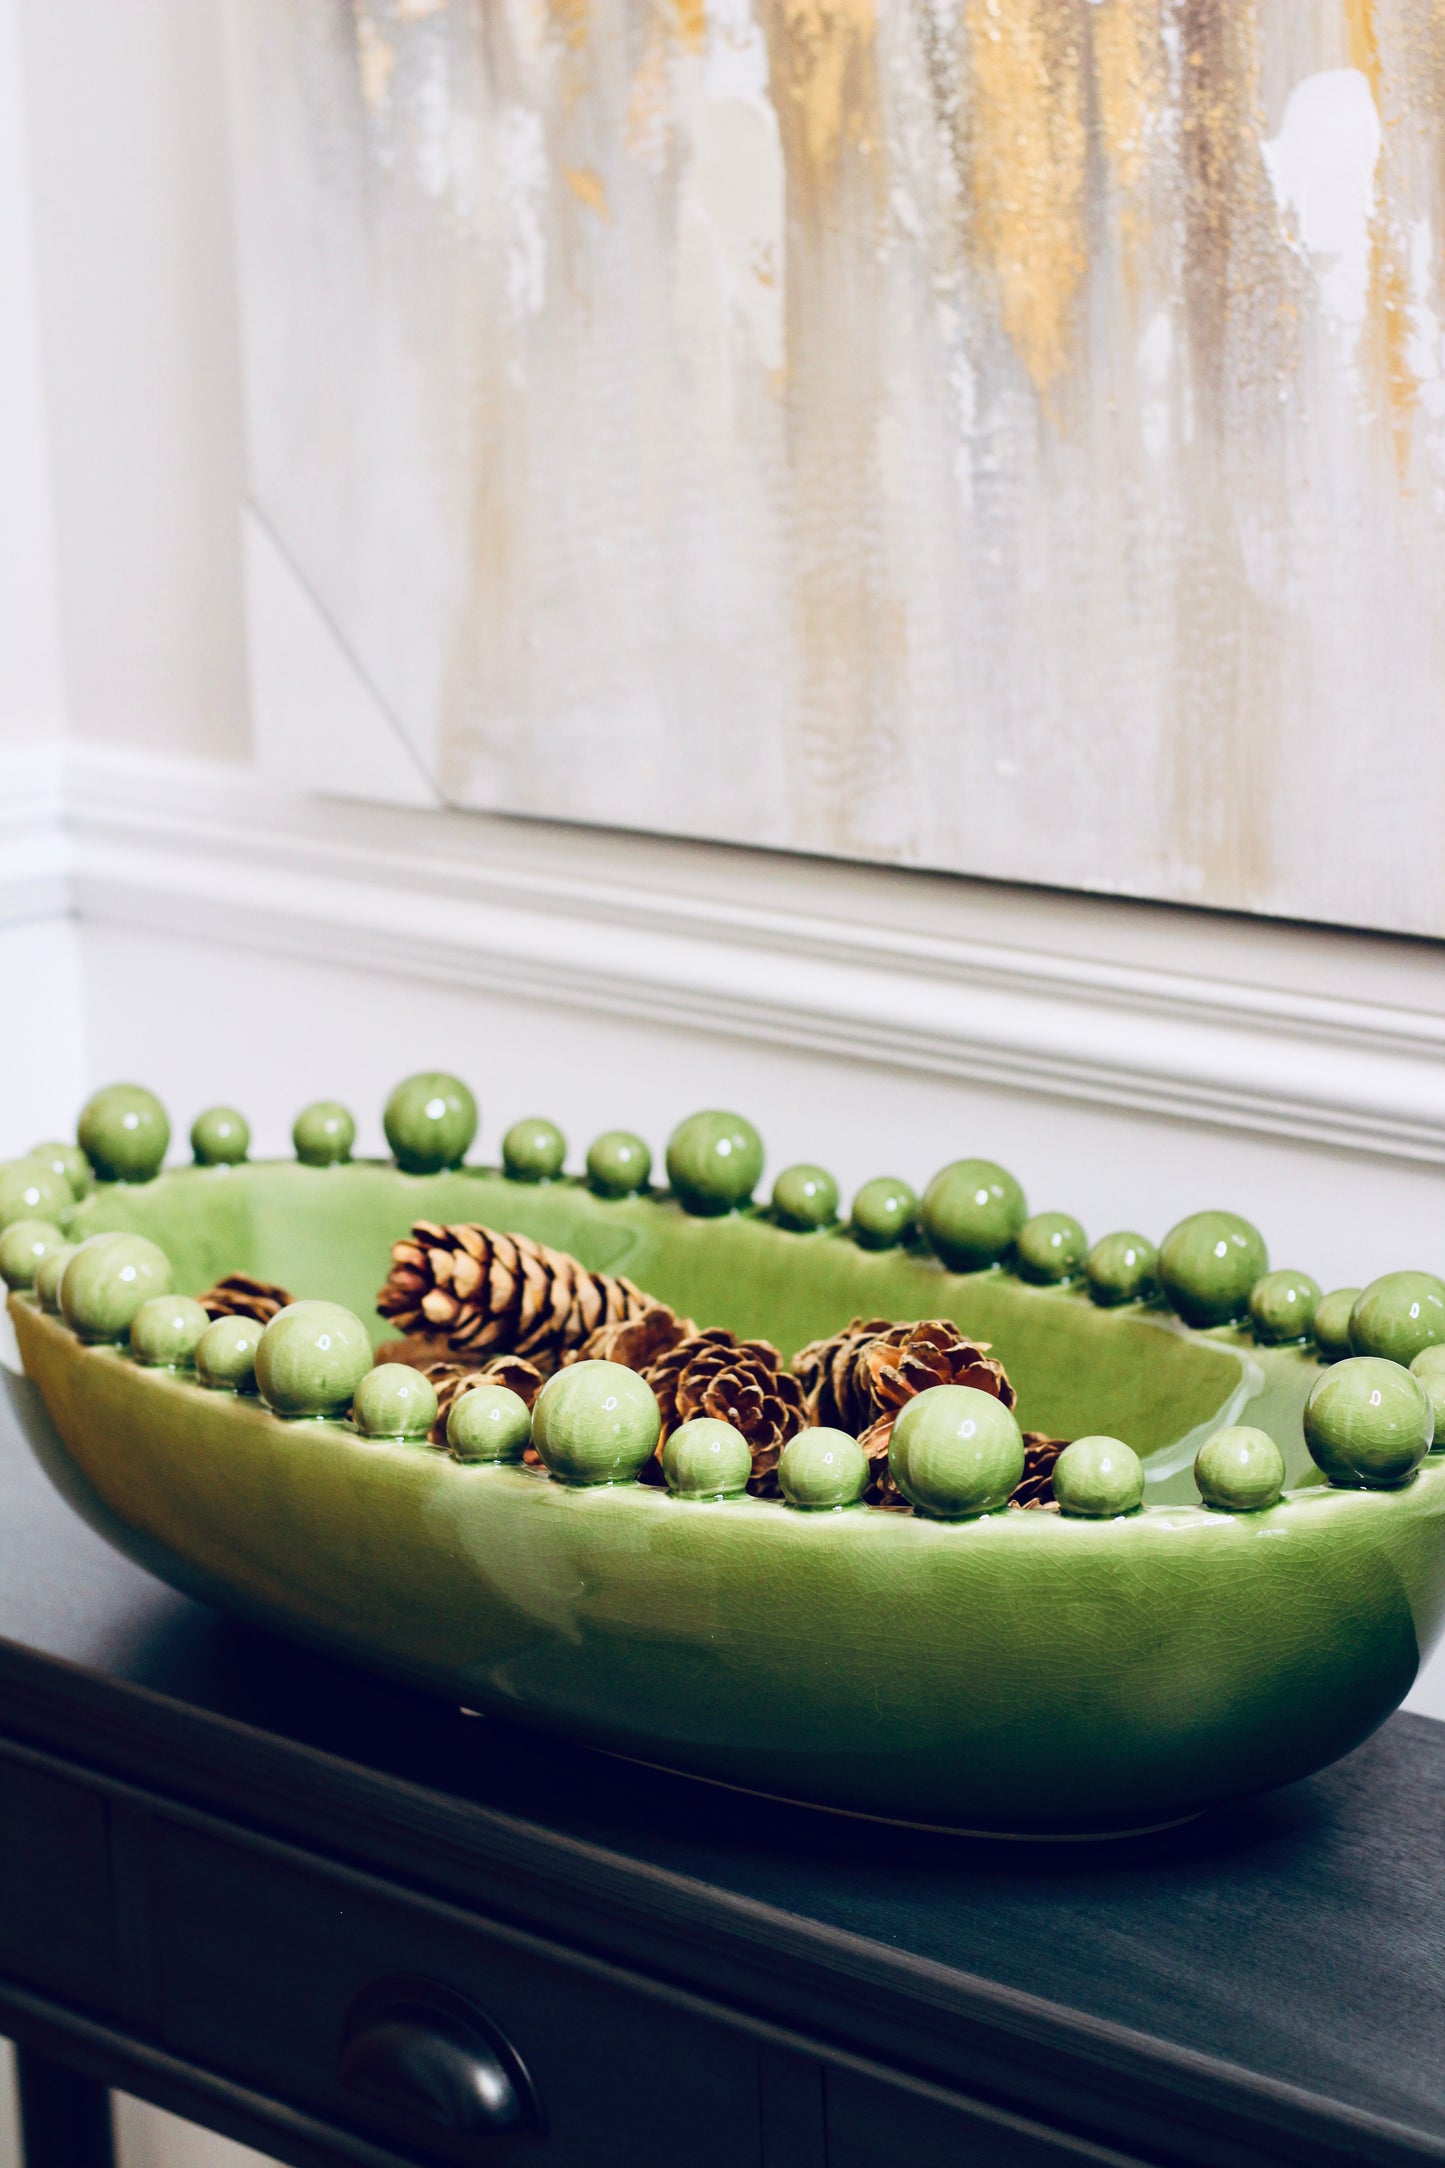 Green Oval Bowl With Bobbled Edge